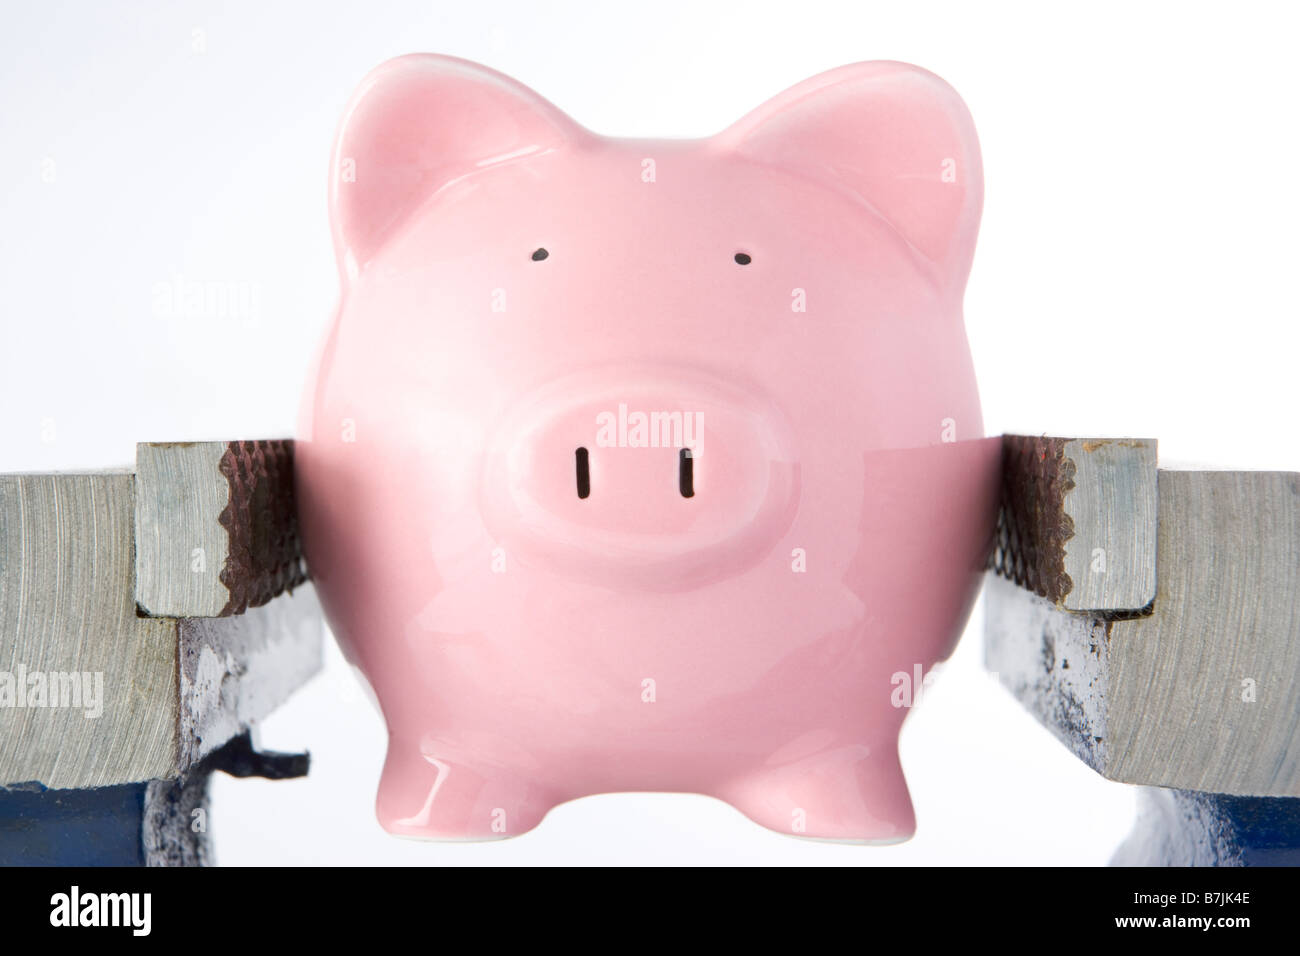 Piggy Bank In Jaws Of Vice Against White Background Stock Photo